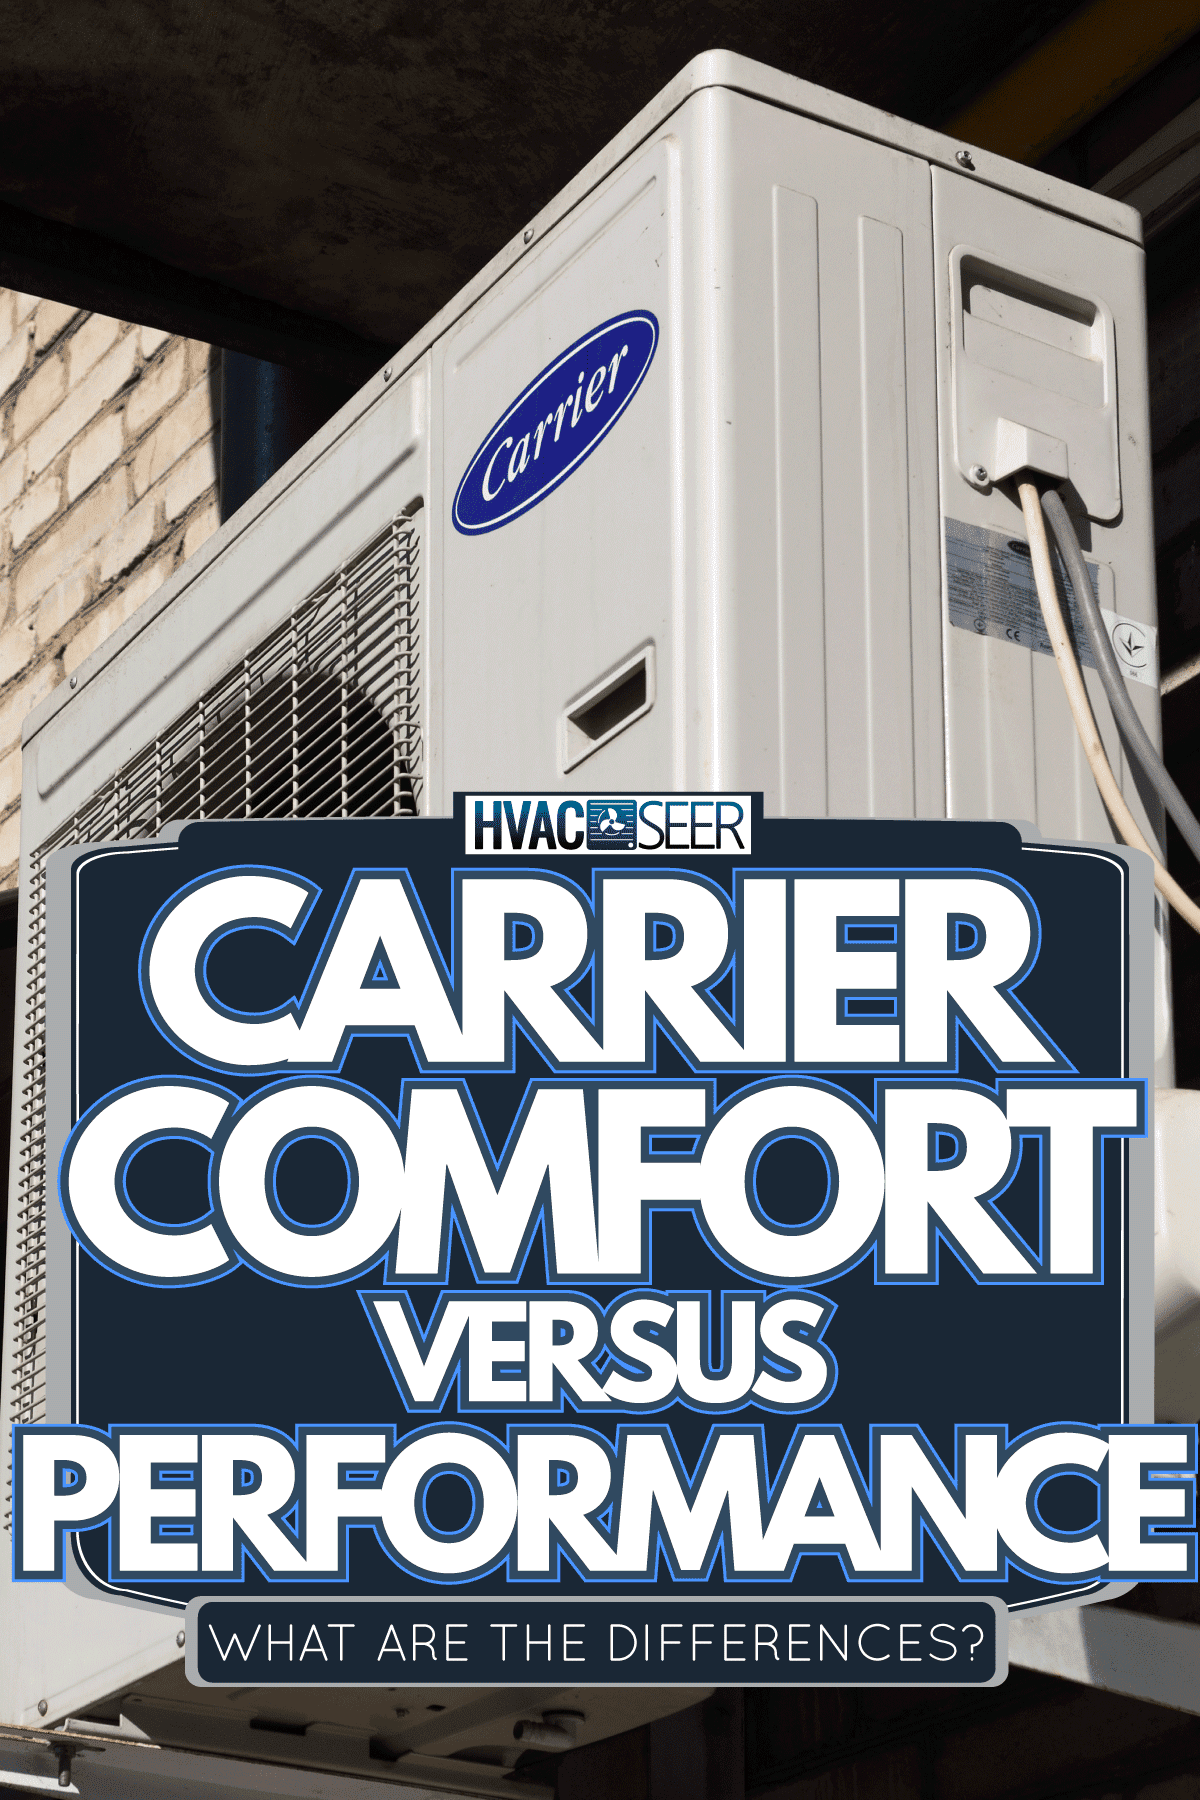 Hvac carrier outside the building, Carrier Comfort Vs. Performance What Are The Differences?